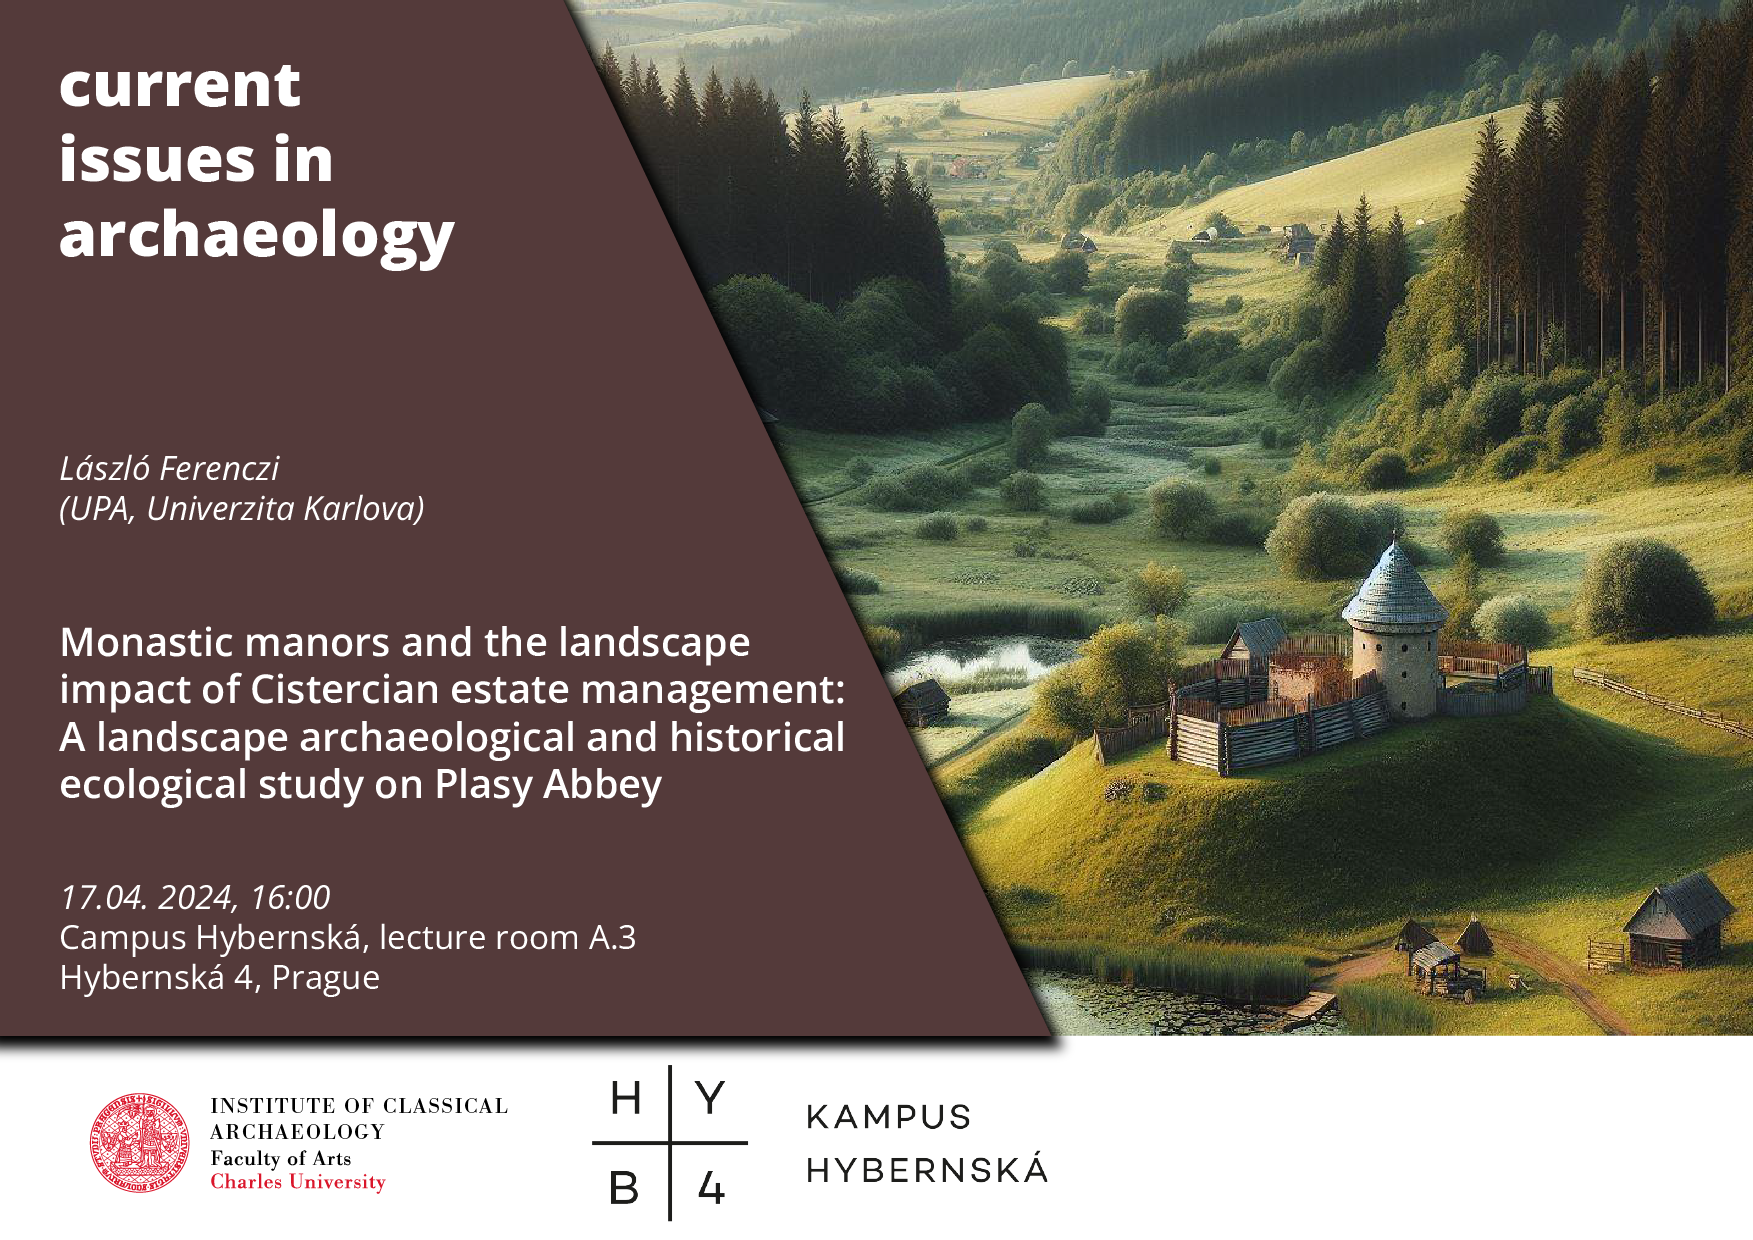 L. Ferenczi (Univerzita Karlova): "Monastic manors and the landscape impact of Cistercian estate management: a landscape archaeological and historical ecological study on Plasy Abbey" @ Kampus Hybernská, lecture room A.3